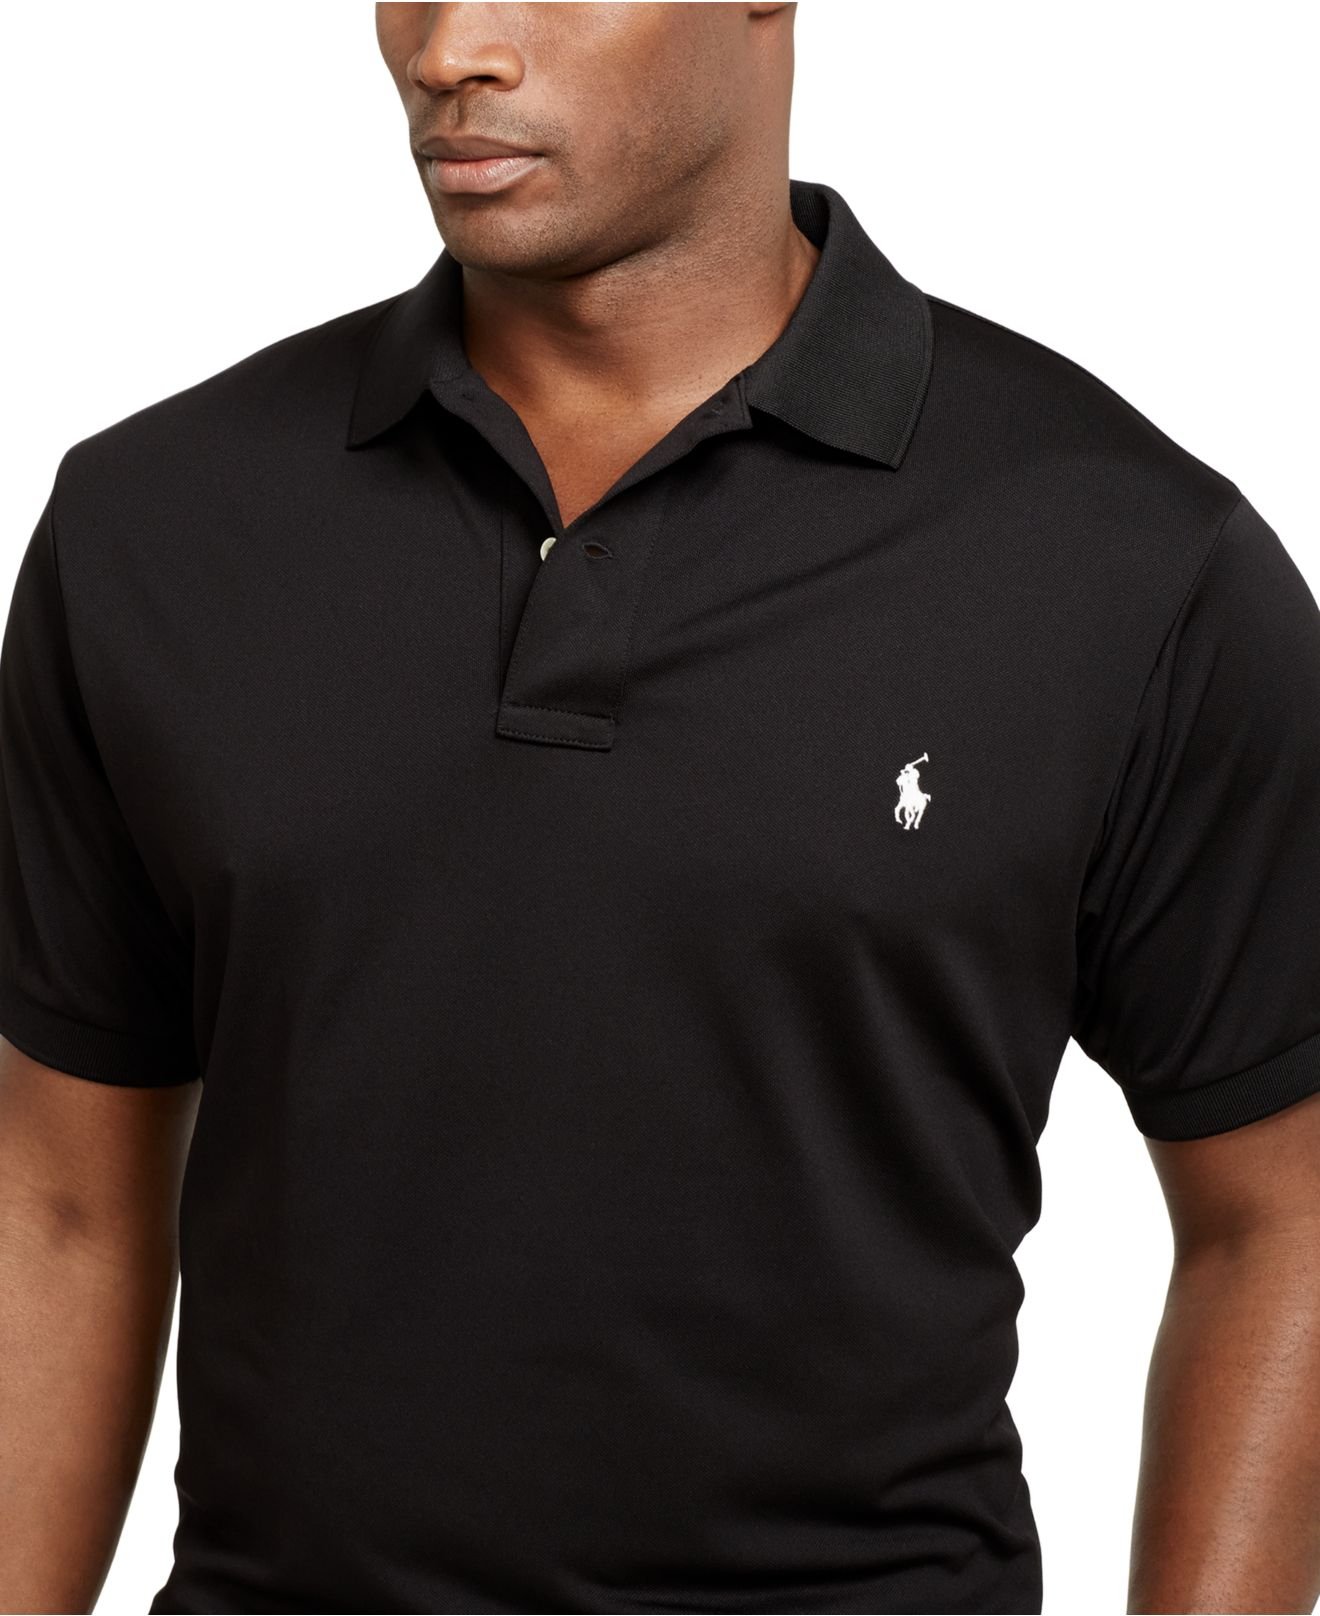 Lyst - Polo Ralph Lauren Big And Tall Performance Mesh Polo Shirt in ...